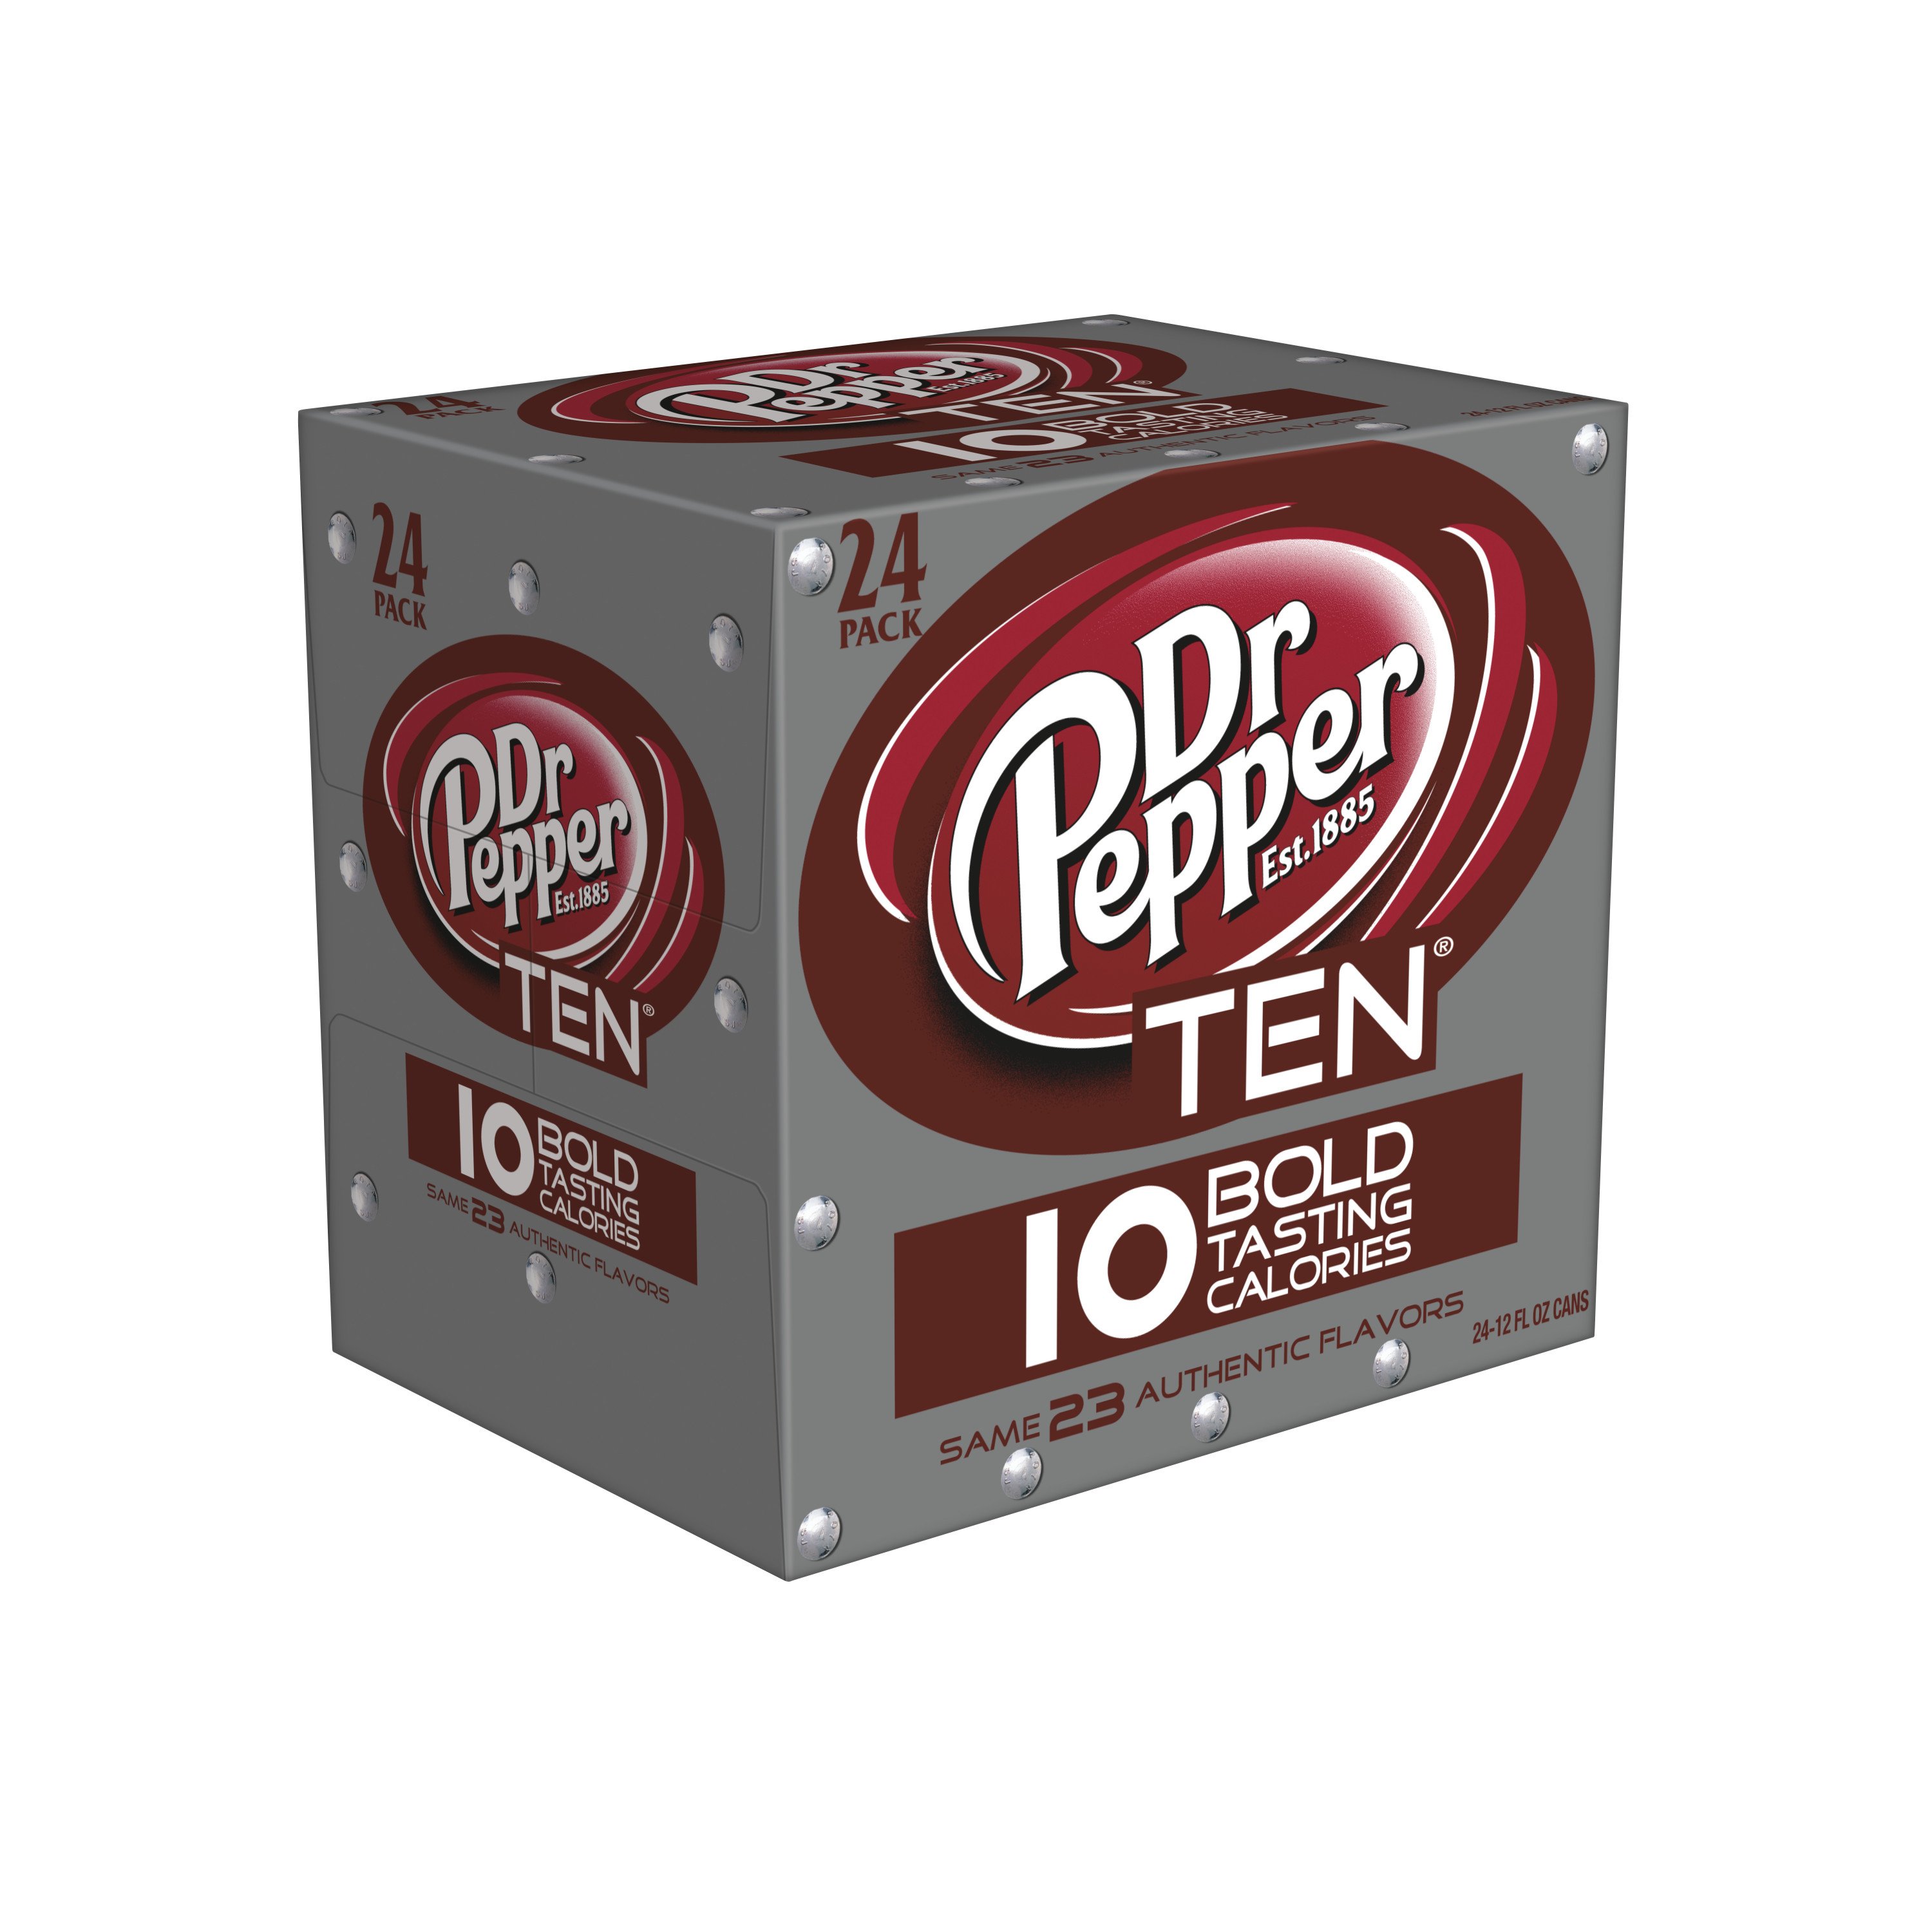 Peppers 10. Dr Pepper poster.